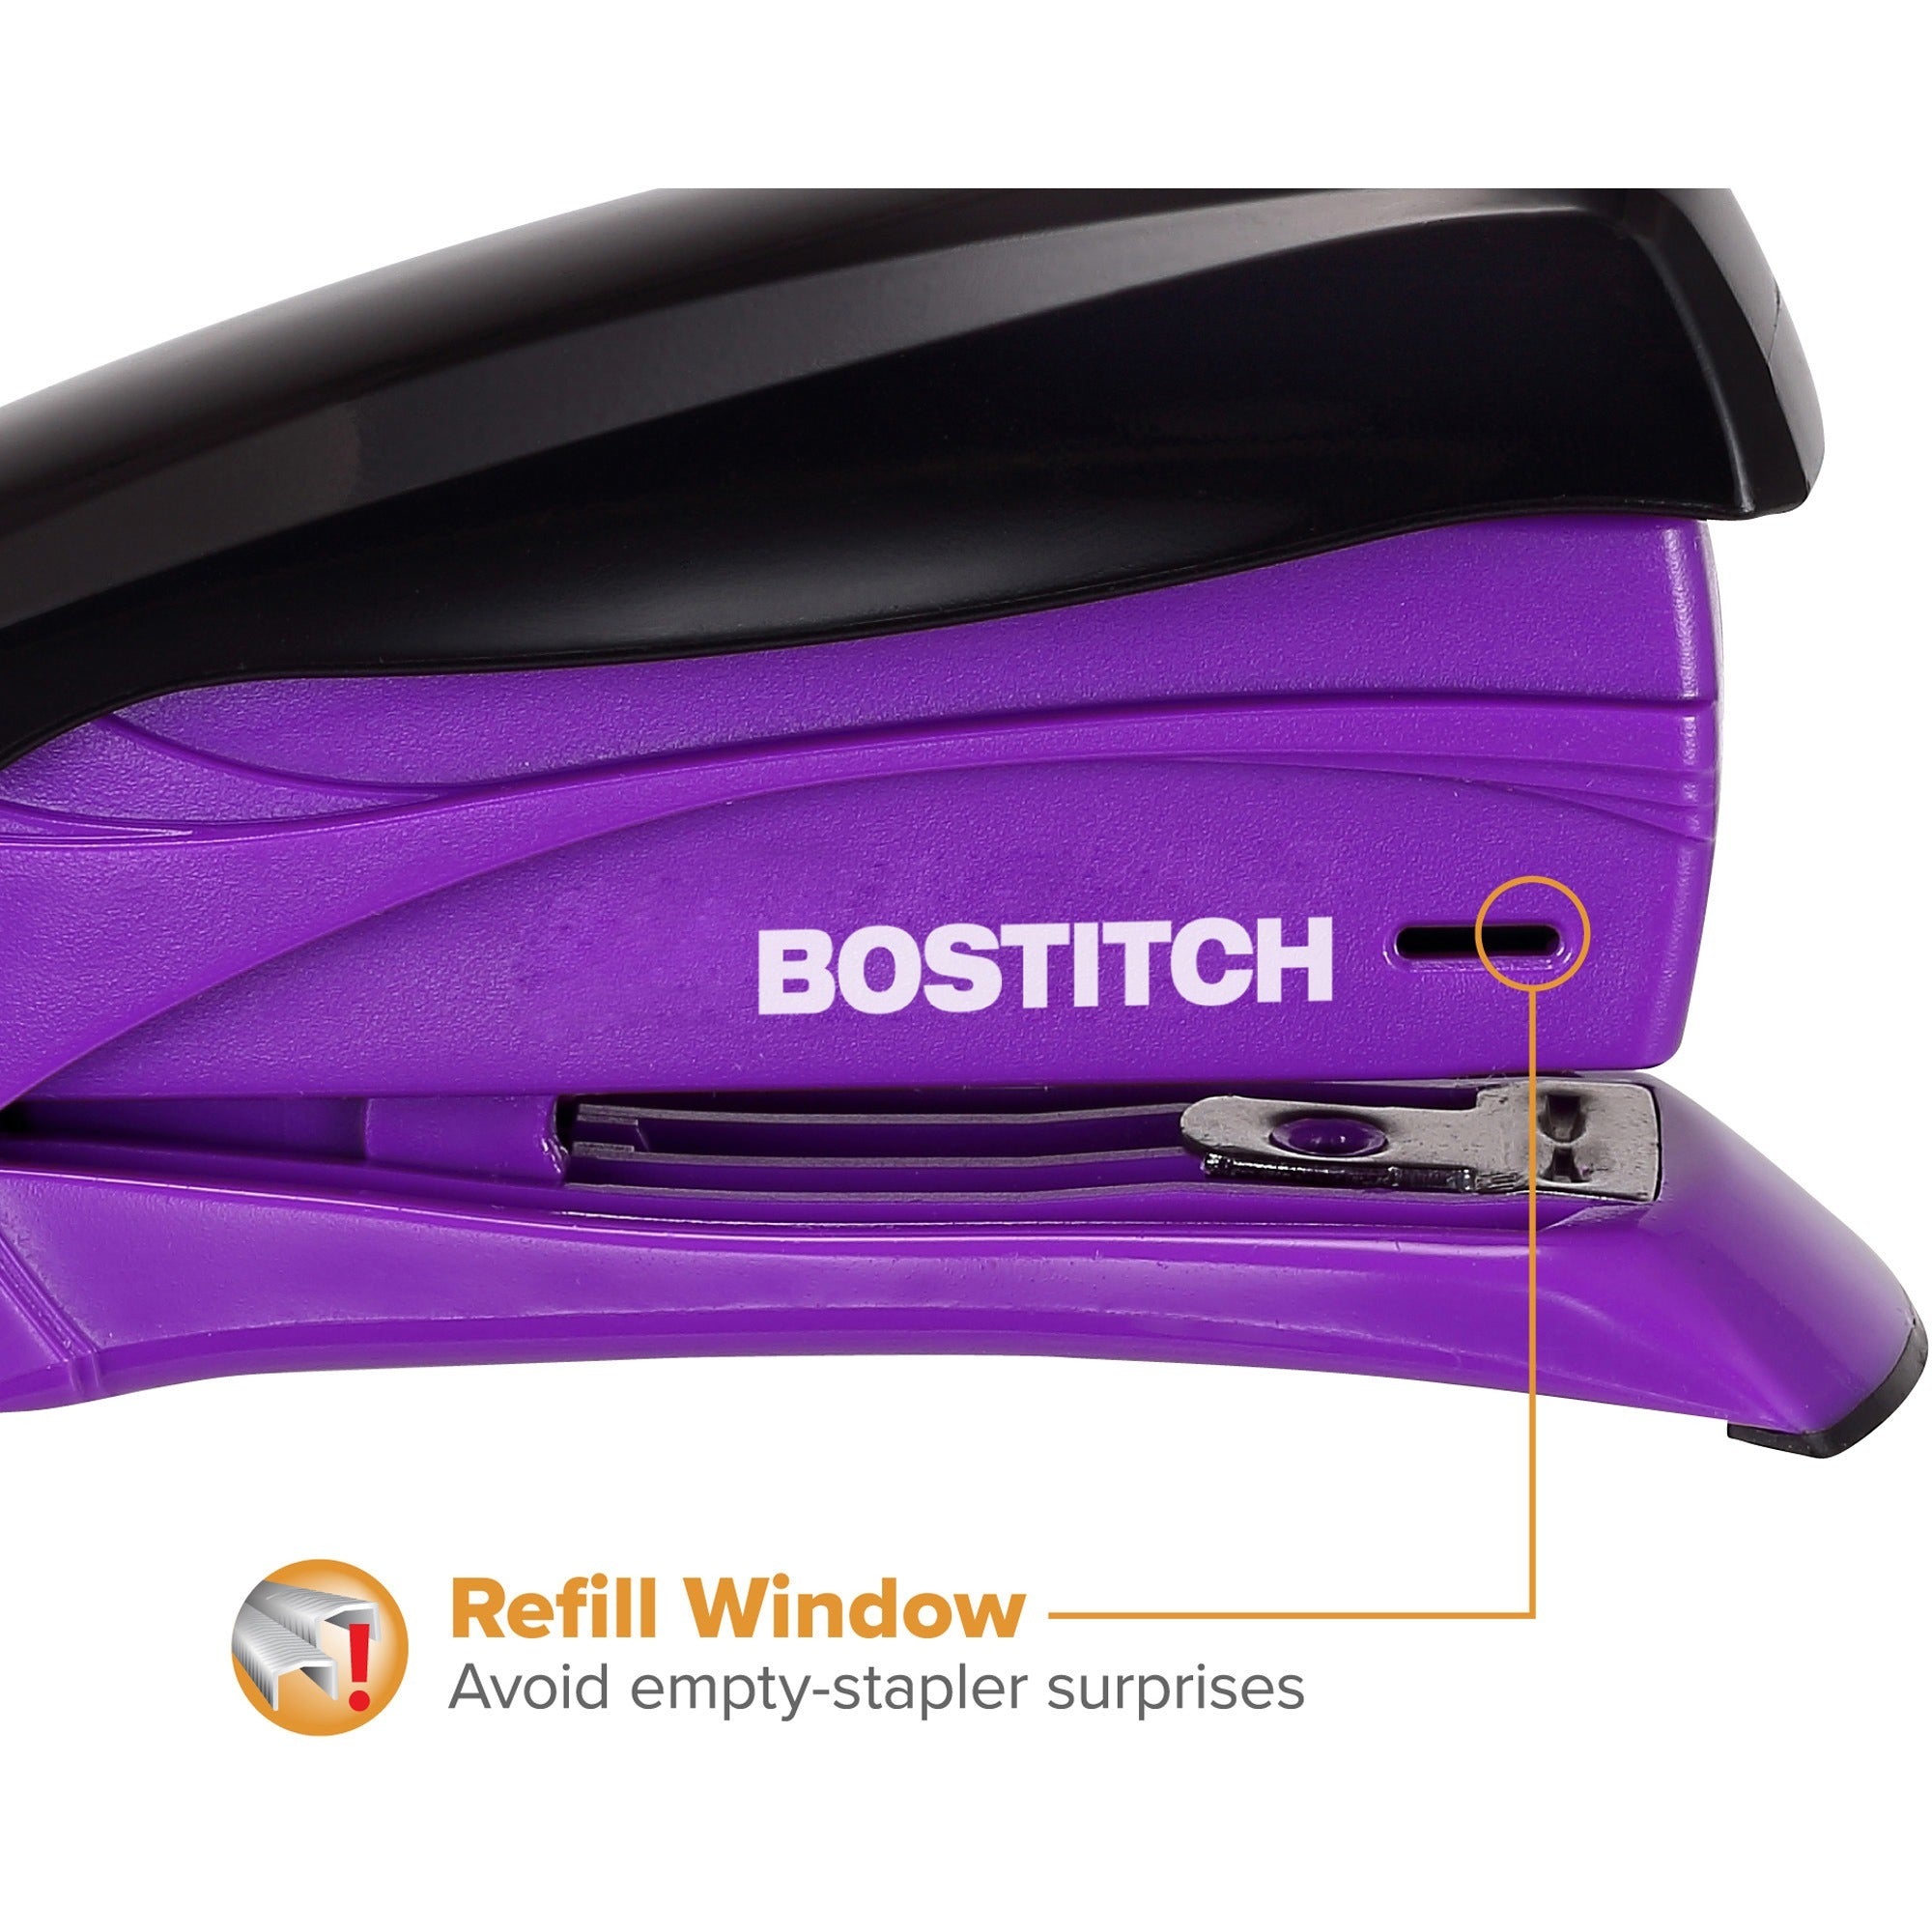 Bostitch Inspire 15 Spring-Powered Compact Stapler - 15 Sheets Capacity - 105 Staple Capacity - Half Strip - 1/4" , 26/6mm Staple Size - 1 Each - Assorted - 